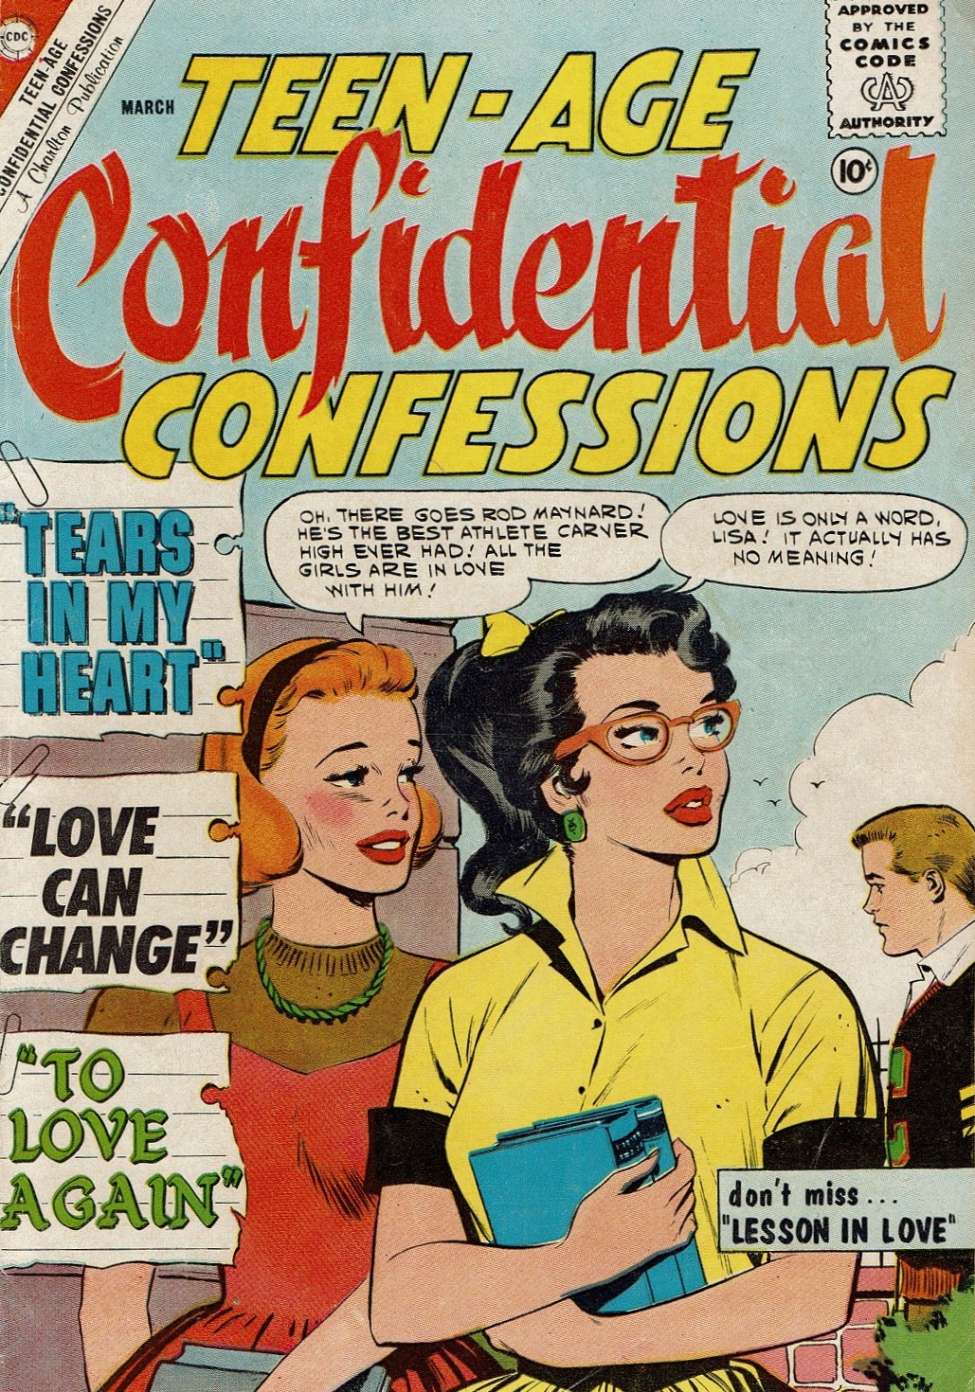 Comic Book Cover For Teen-Age Confidential Confessions 5